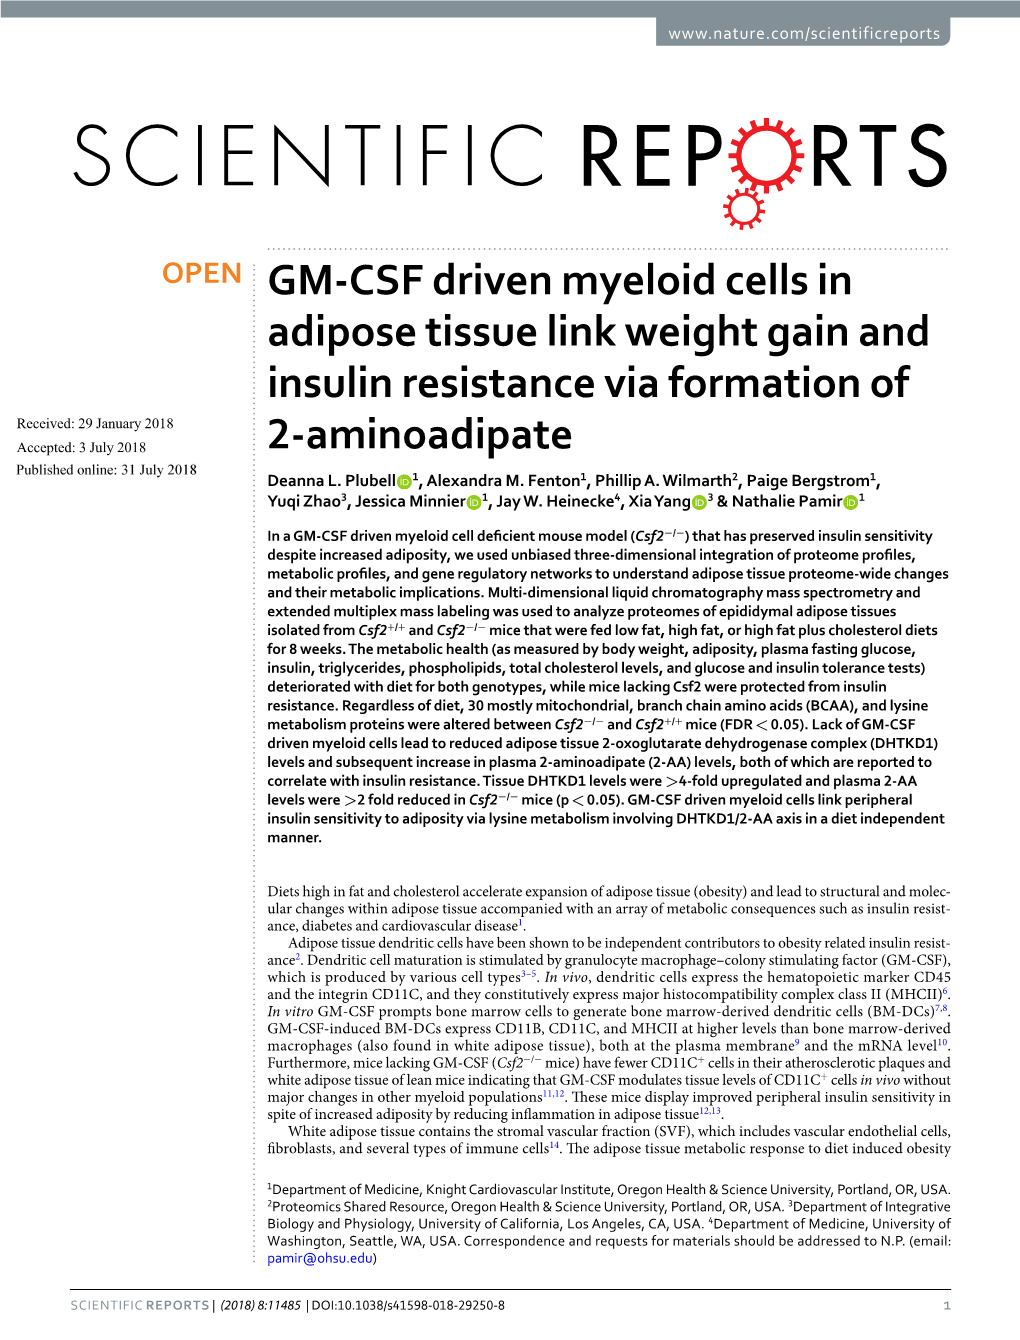 GM-CSF Driven Myeloid Cells in Adipose Tissue Link Weight Gain And